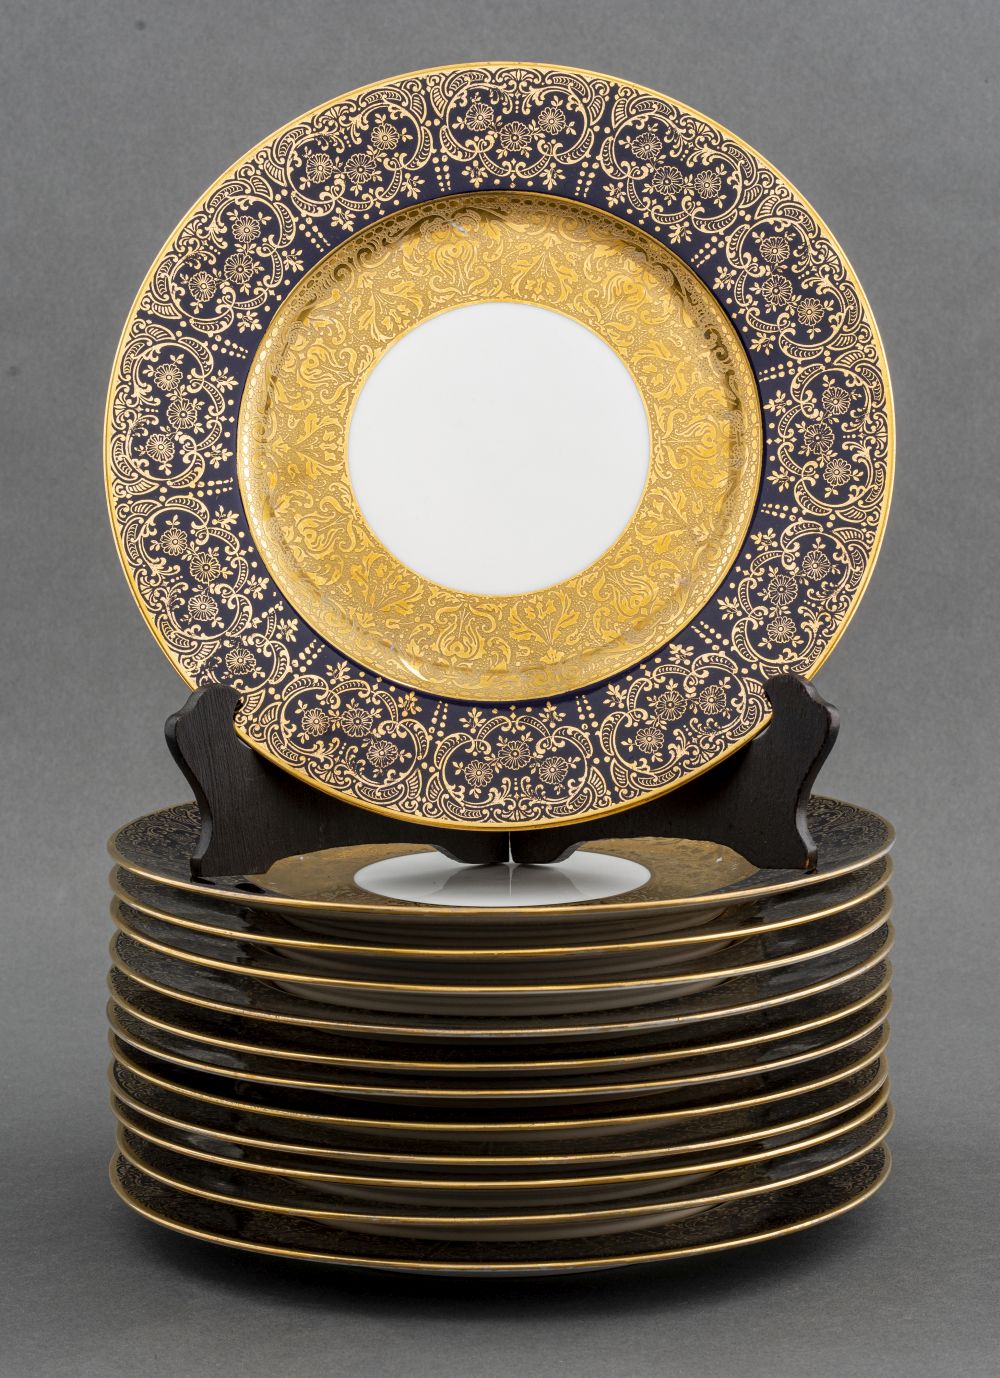 HUTSCHENREUTHER LIMOGES GOLD ENCRUSTED 3c574b